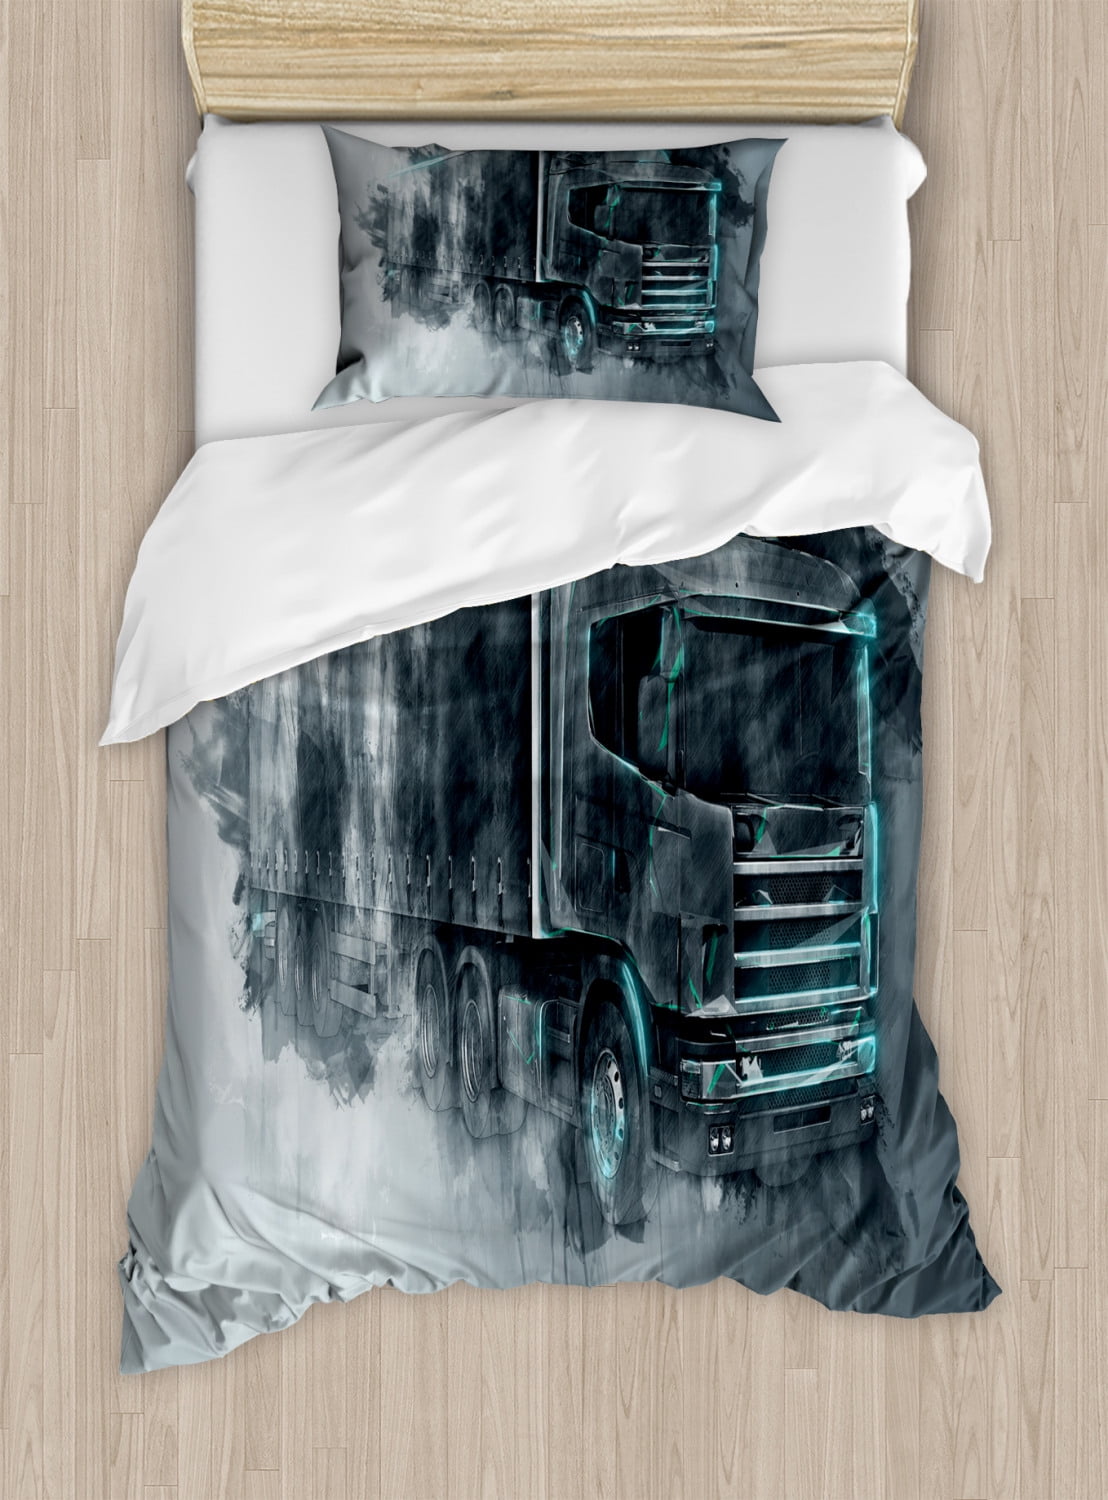 Truck Duvet Cover Set Greyscale Illustration Of A Tractor Trailer